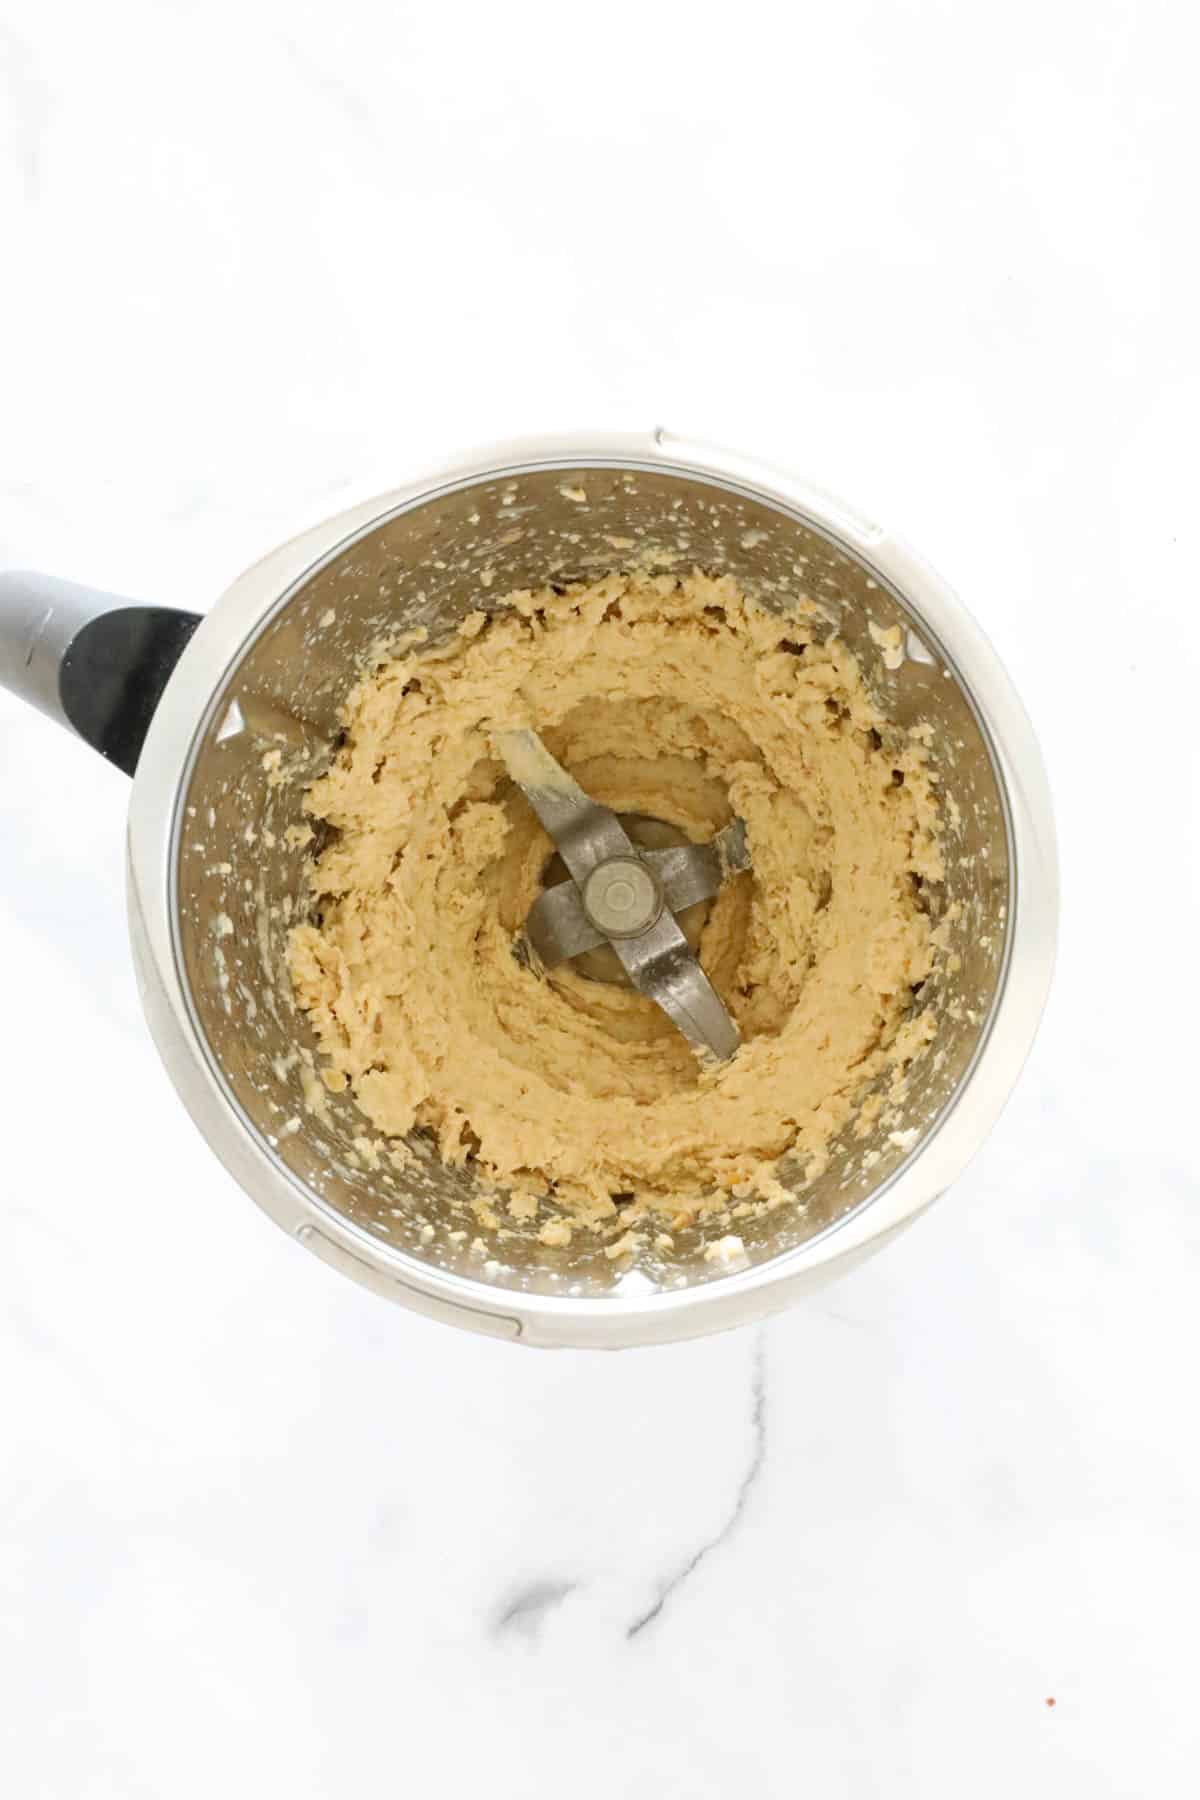 Hummus in a Thermomix bowl.